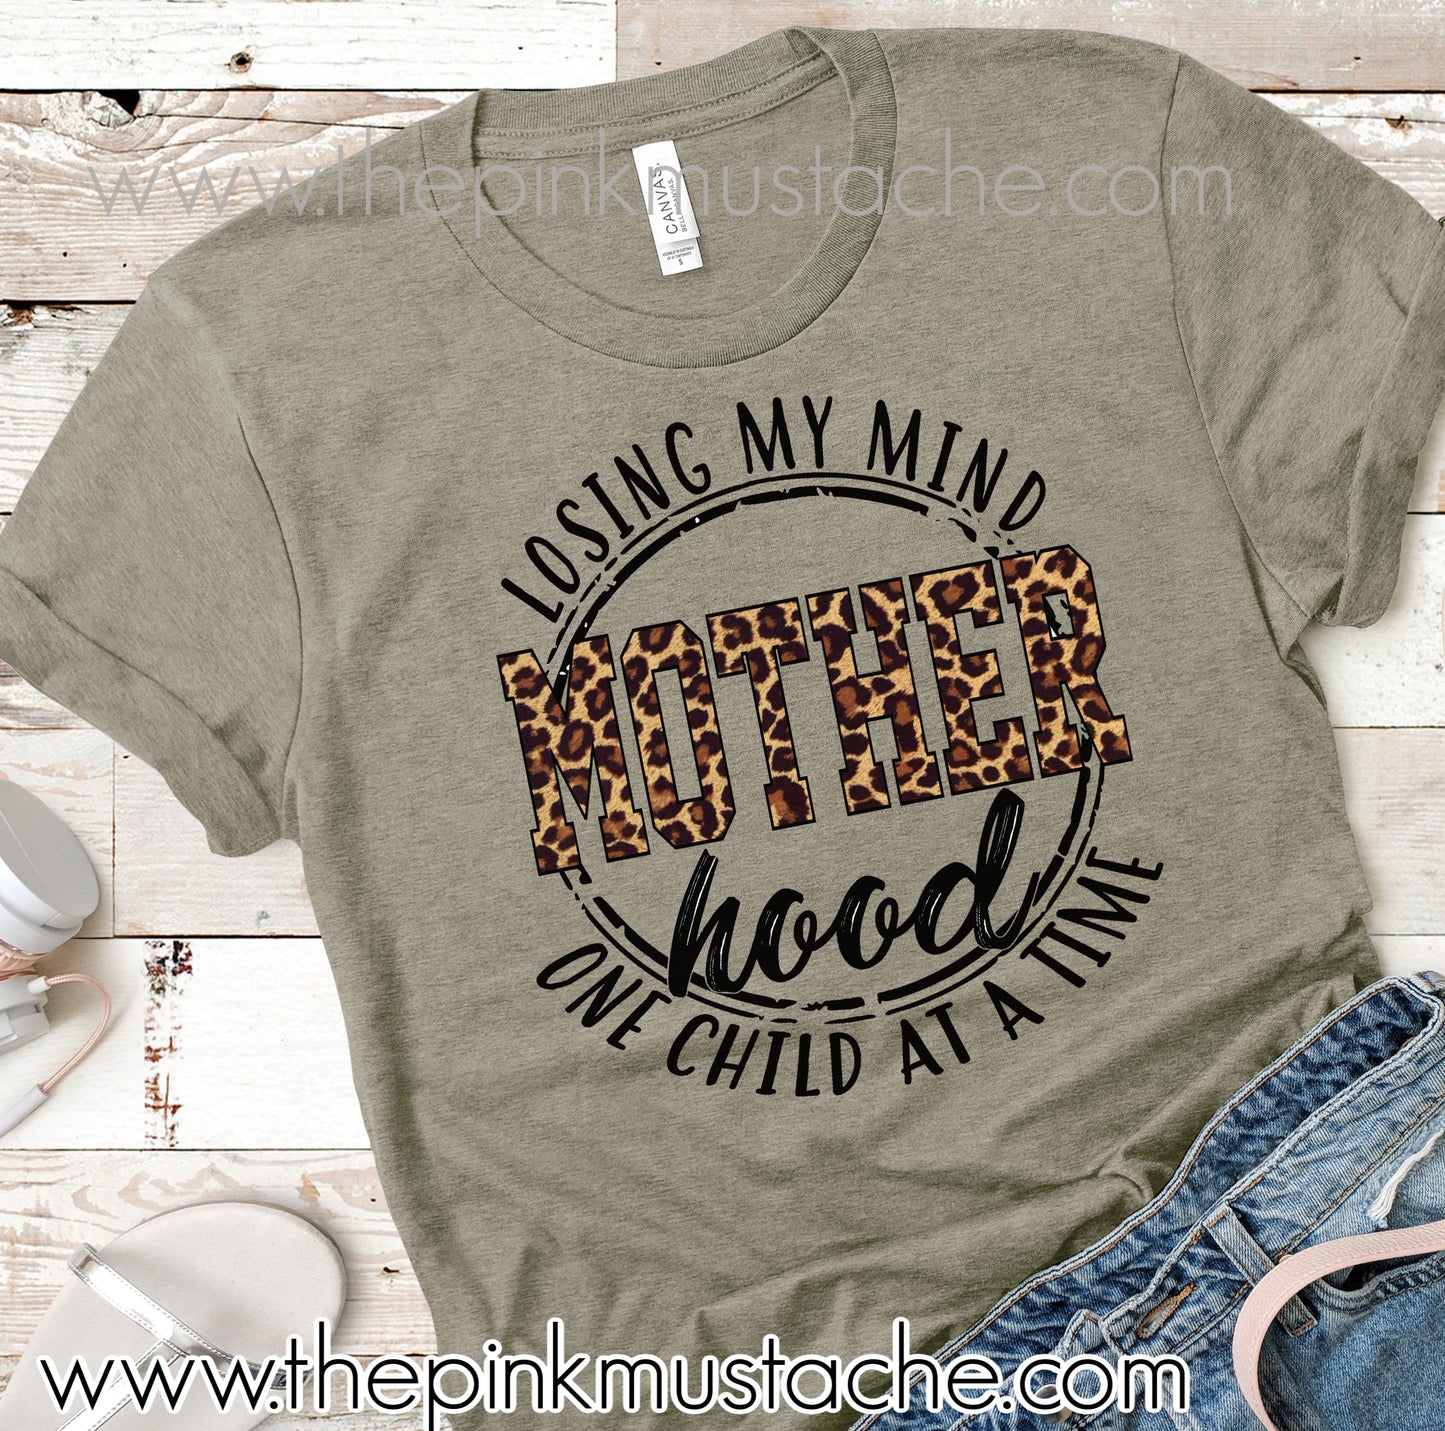 Motherhood, Losing My Mind One Child At A Time - Funny Mom Shirt - Layering Graphic T-Shirt